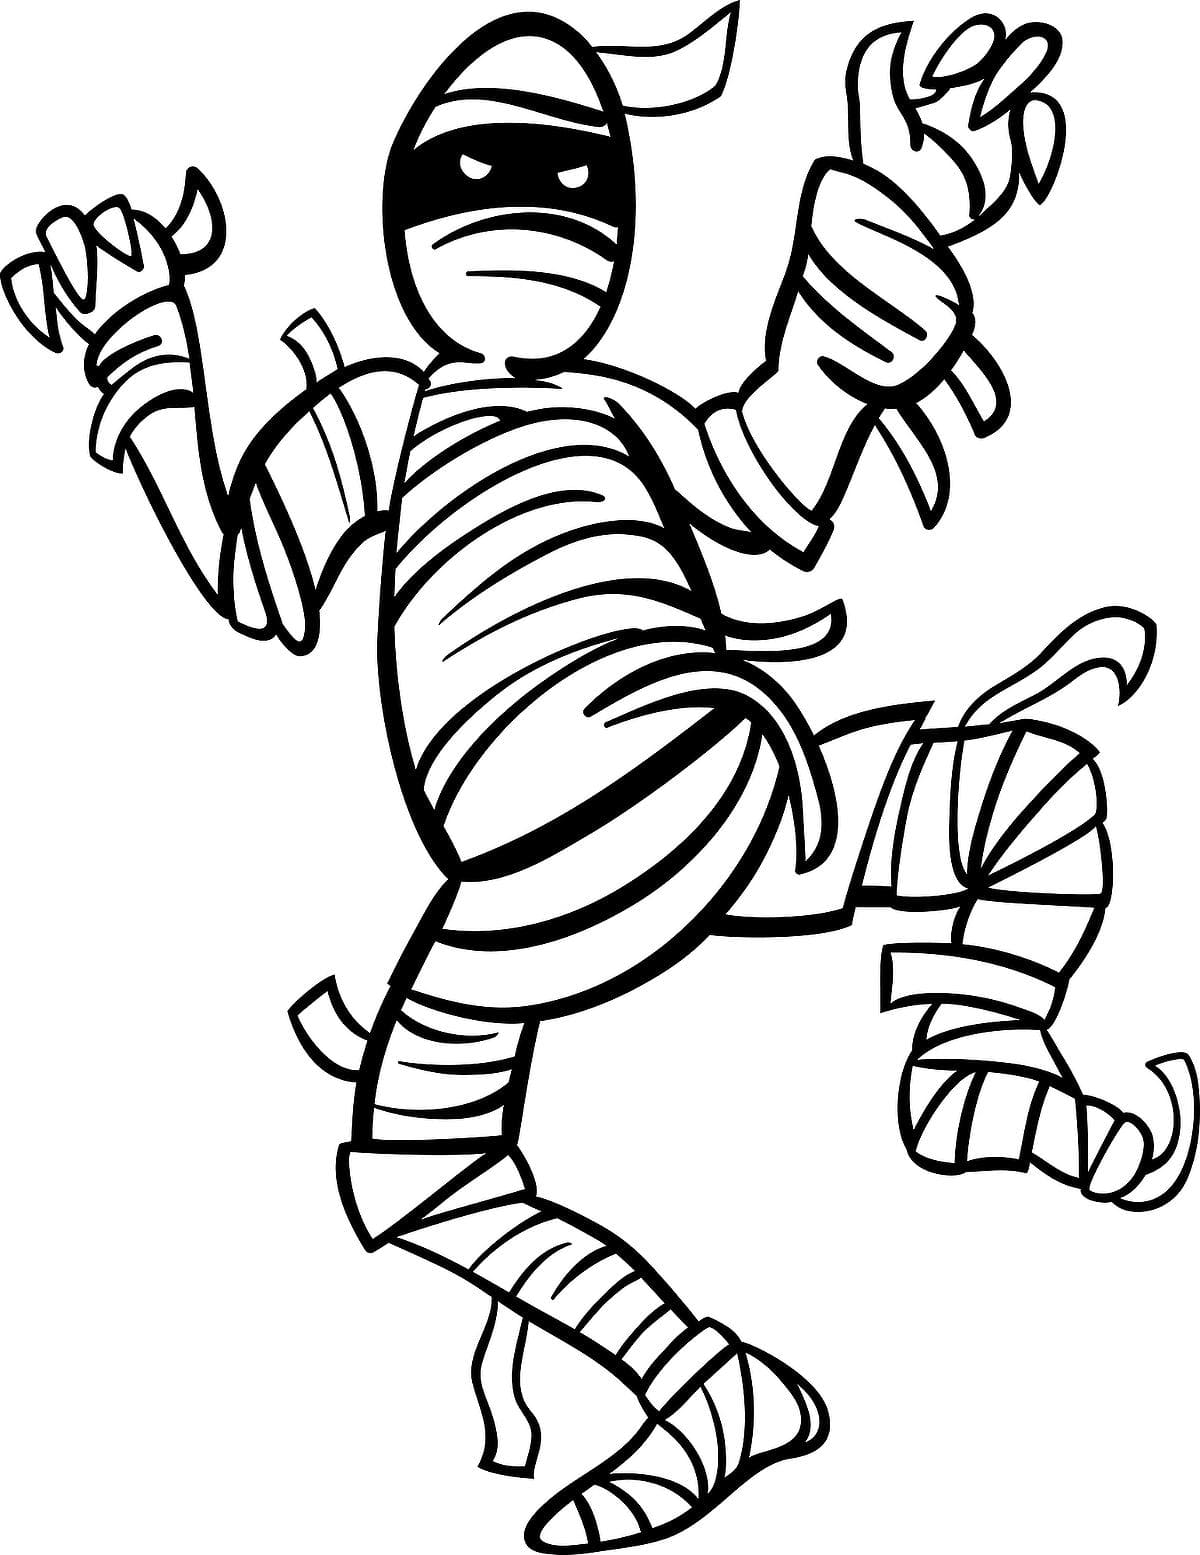 Halloween Monster Funny Image For Kids Coloring Page